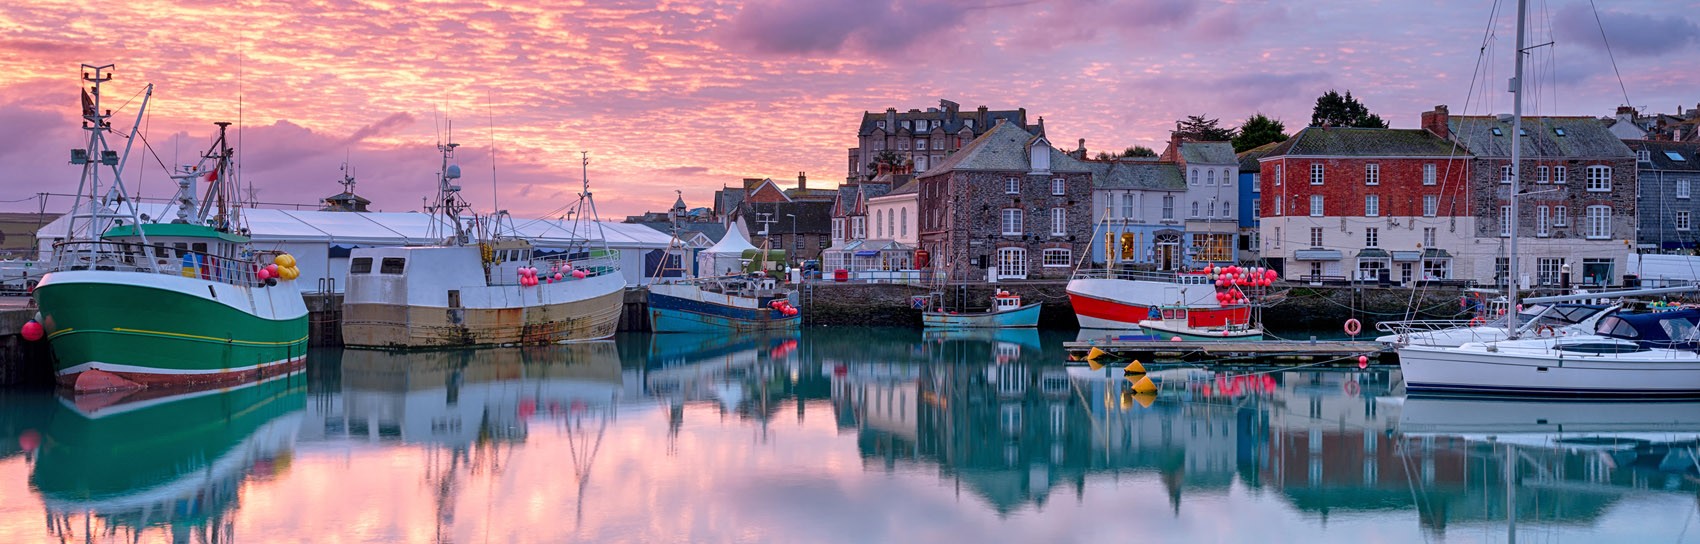 Sunrise in Padstow in Cornwall. Photograph by HELEN HOTSON